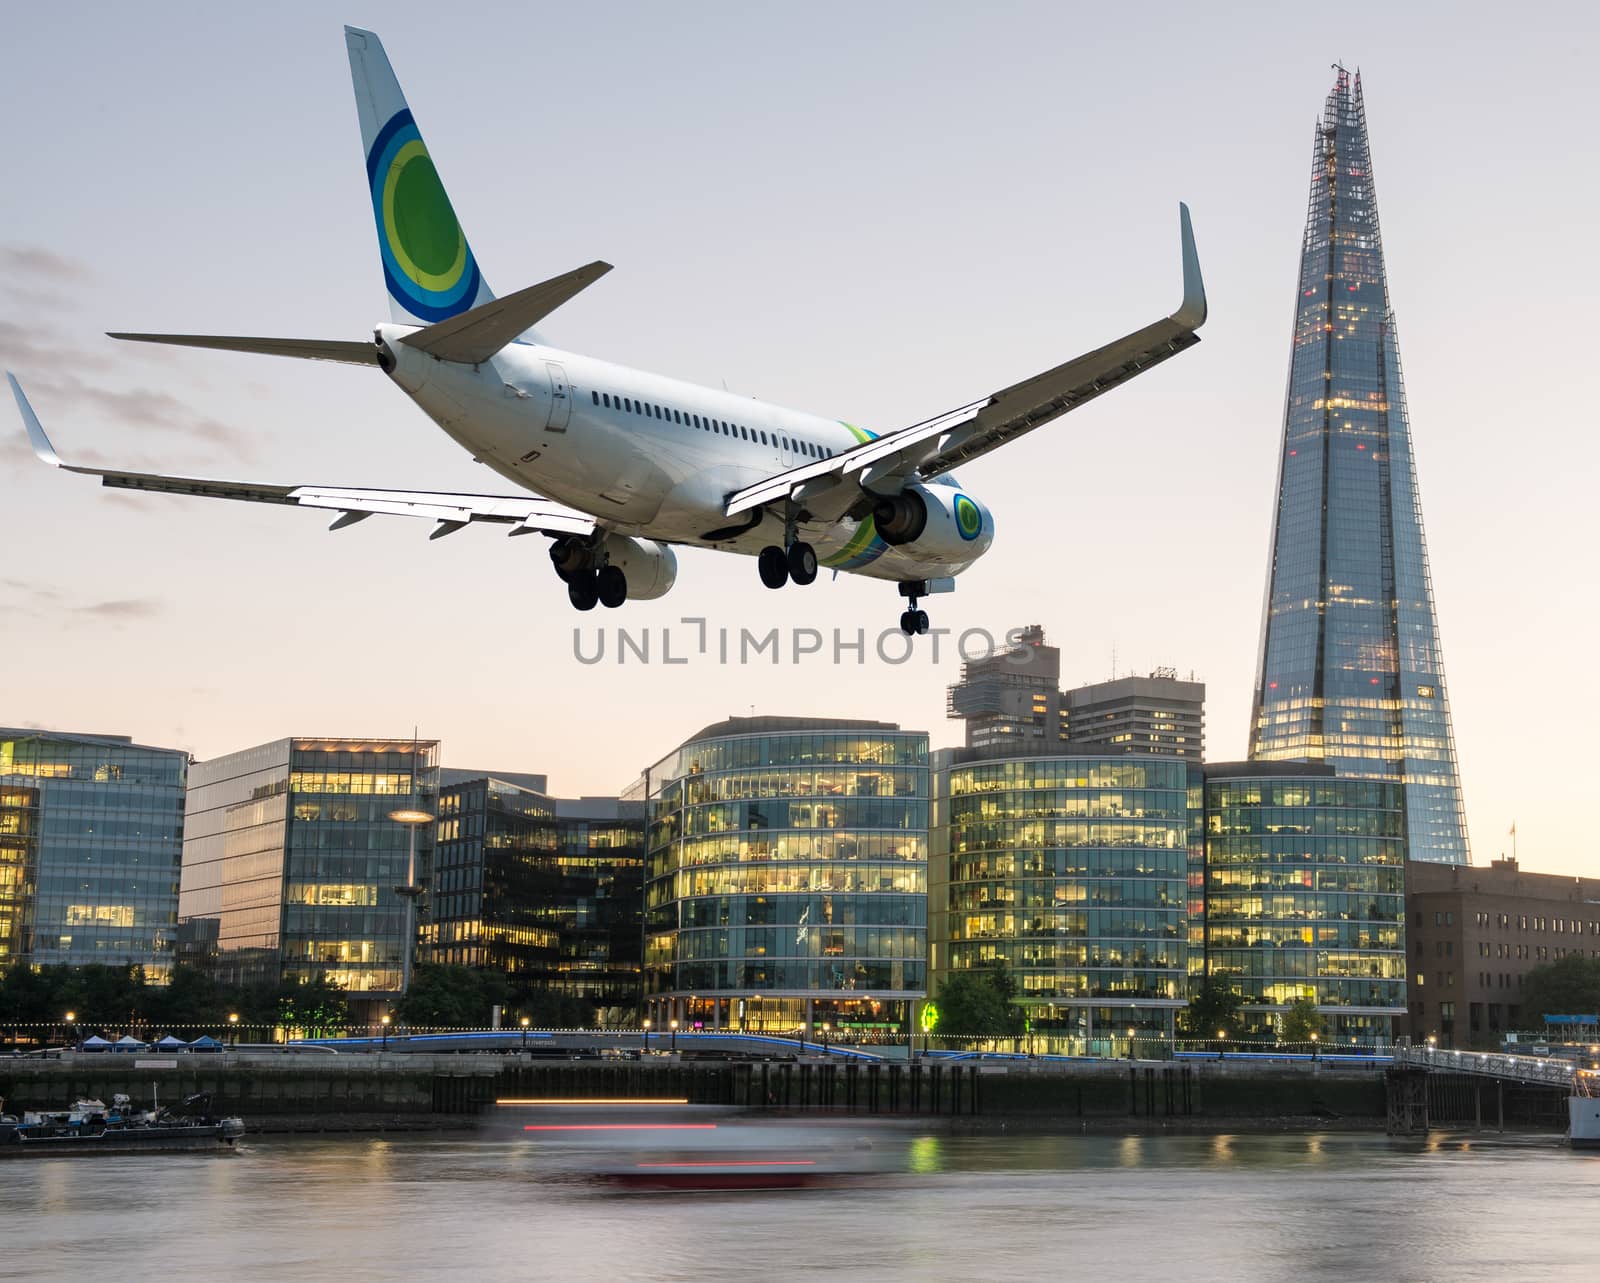 Airplane overflying London - Tourism and vacation concept by jovannig